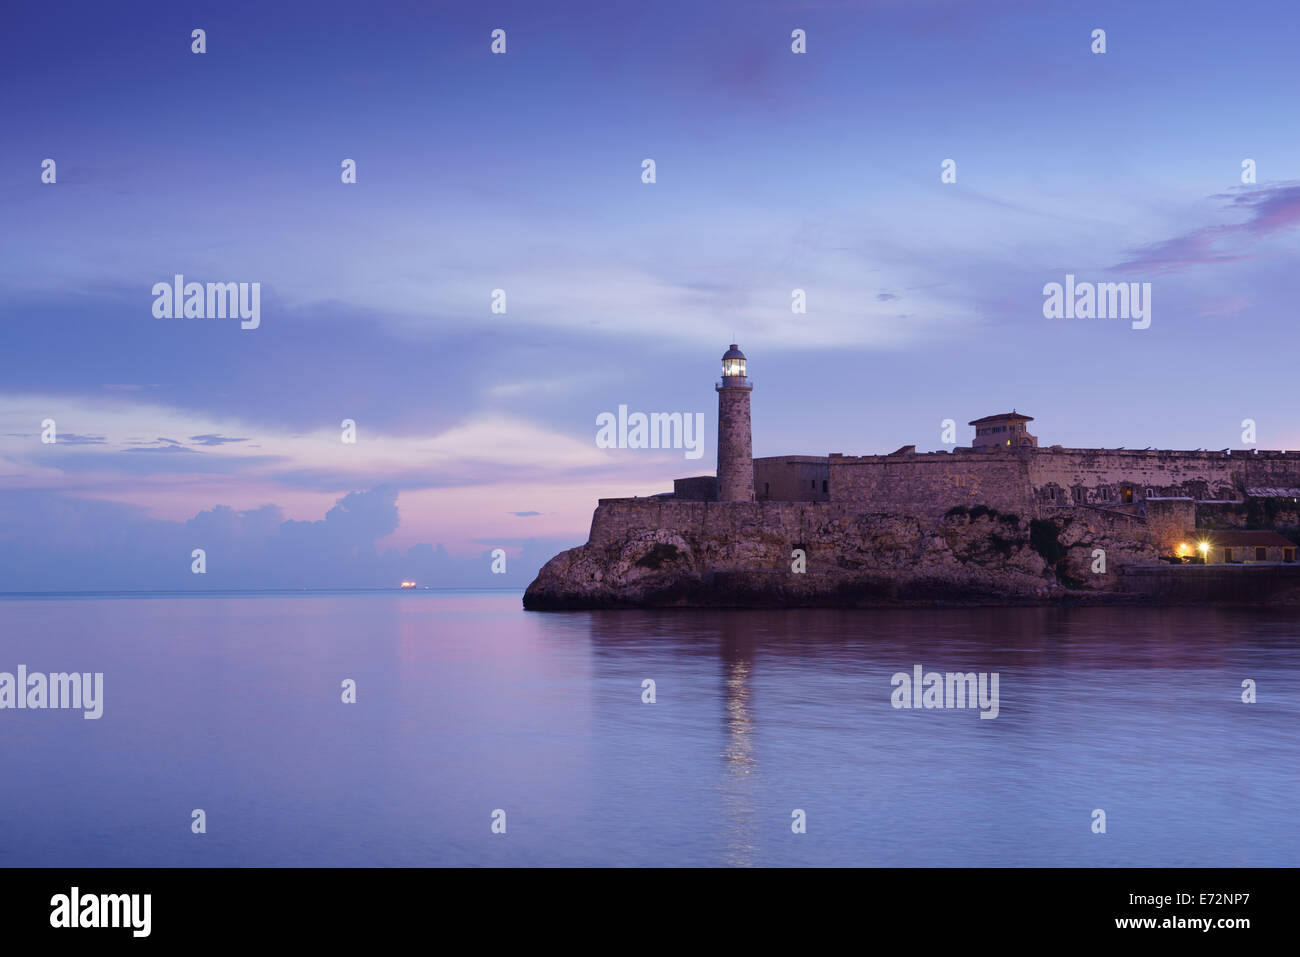 Tourism and travel destinations. Cuba, Caribbean sea, La Habana, Havana. View of morro and lighthouse from malecon. Copy space Stock Photo